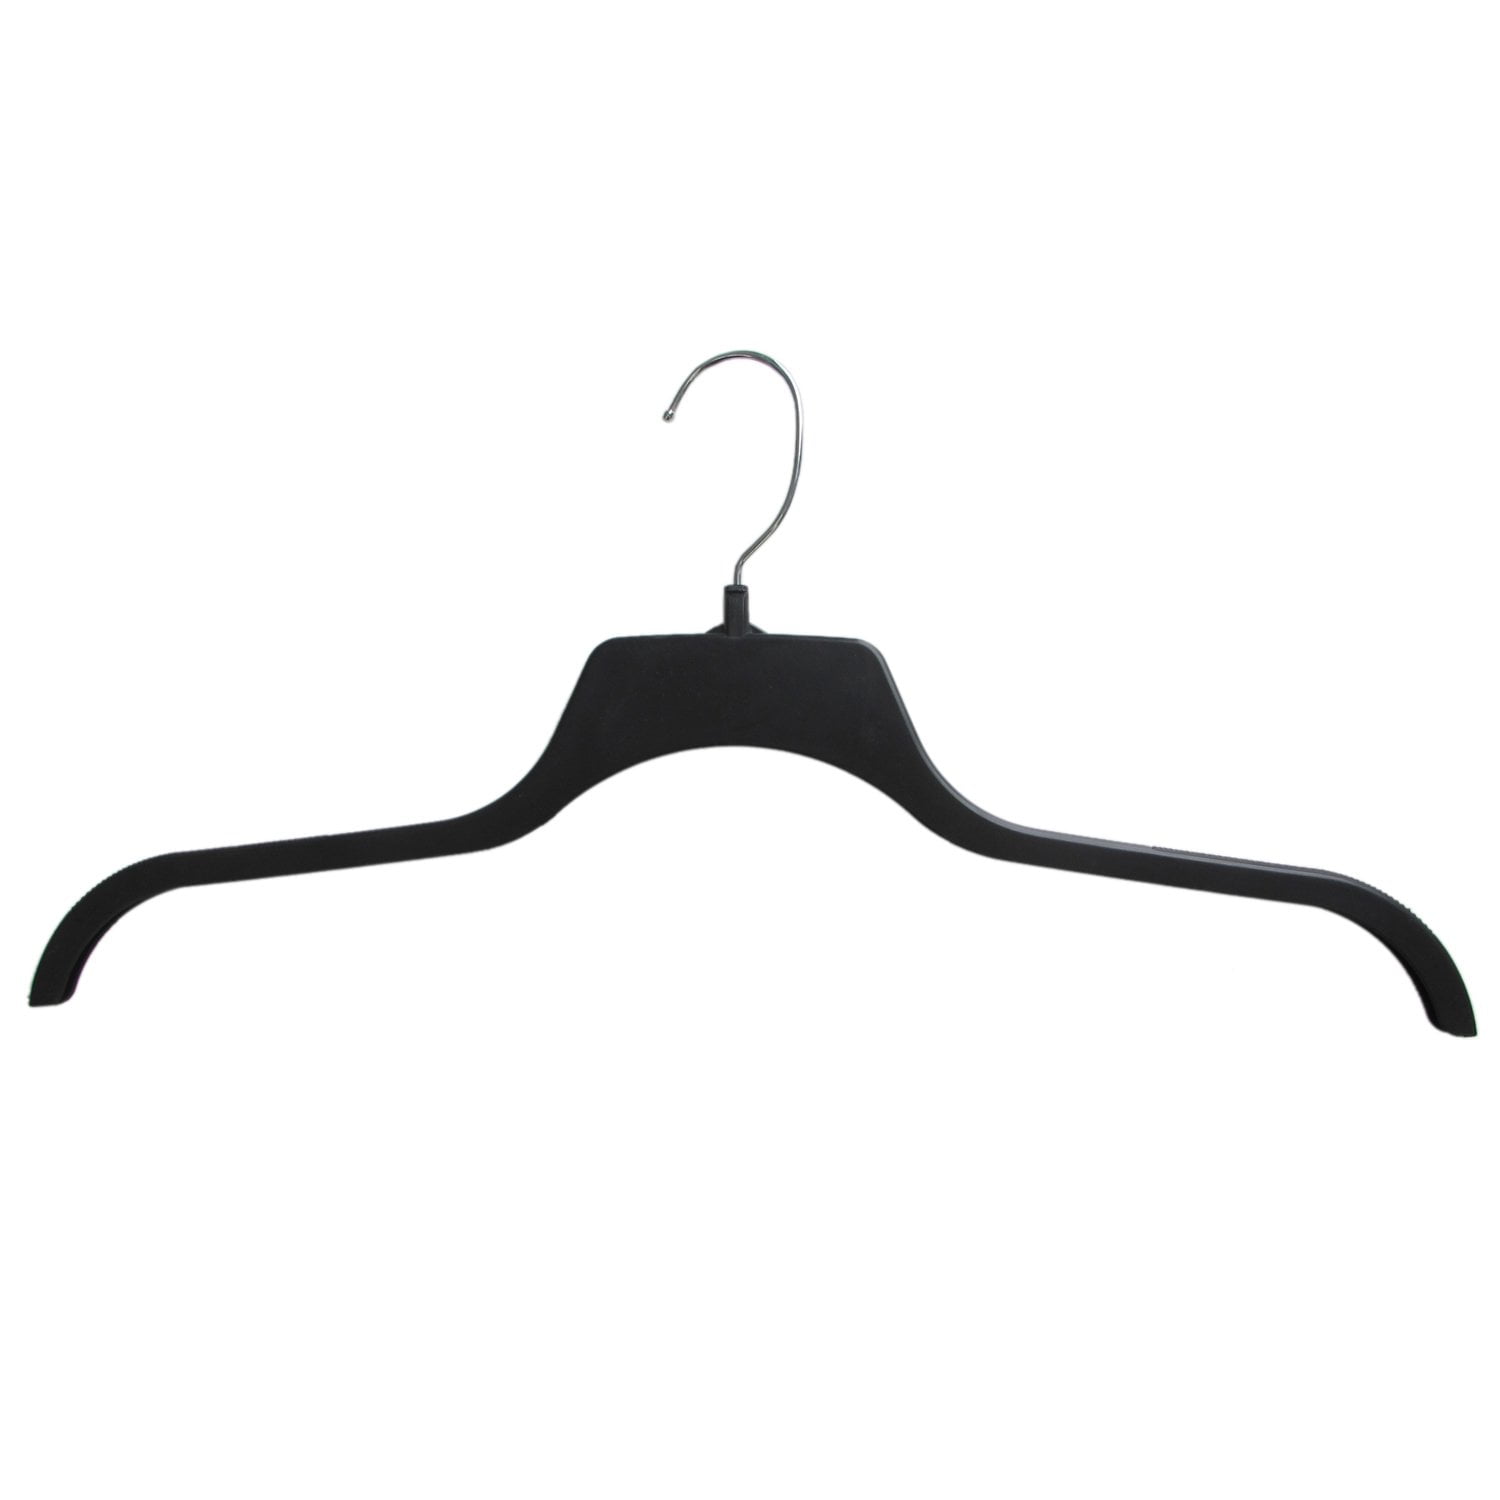 Super Heavy-Duty 17 inch Wide Black Plastic Adult Shirt Hangers with Swivel  Hook and Notched Shoulders (Quantity 25) (Black, 25)